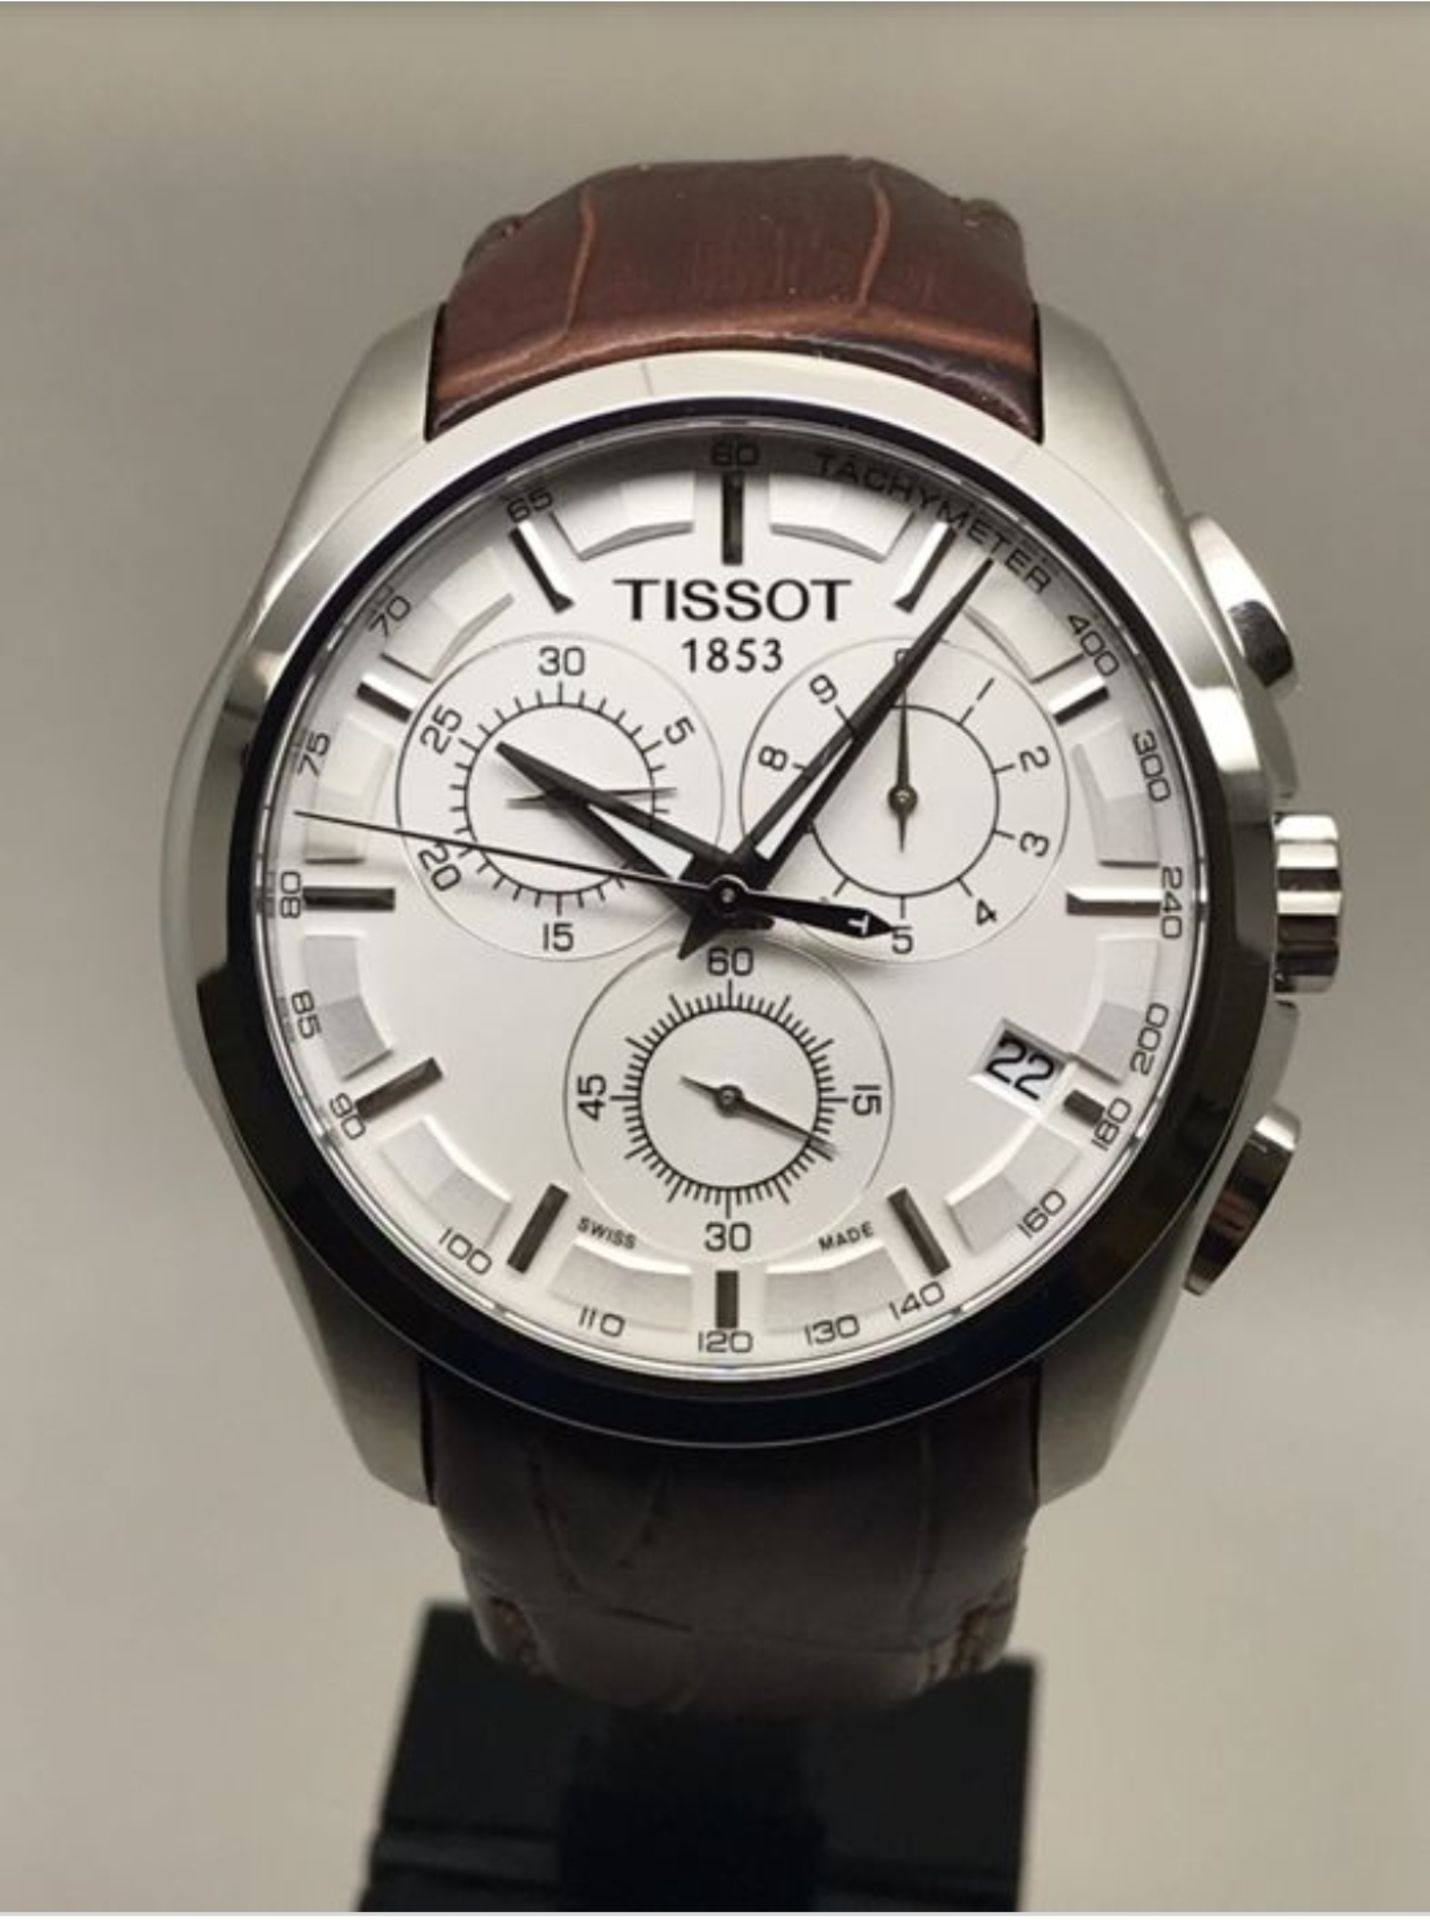 Tissot - Couturier Chronograph - T035.617.16.031.00 - Men's Watch - Image 6 of 8